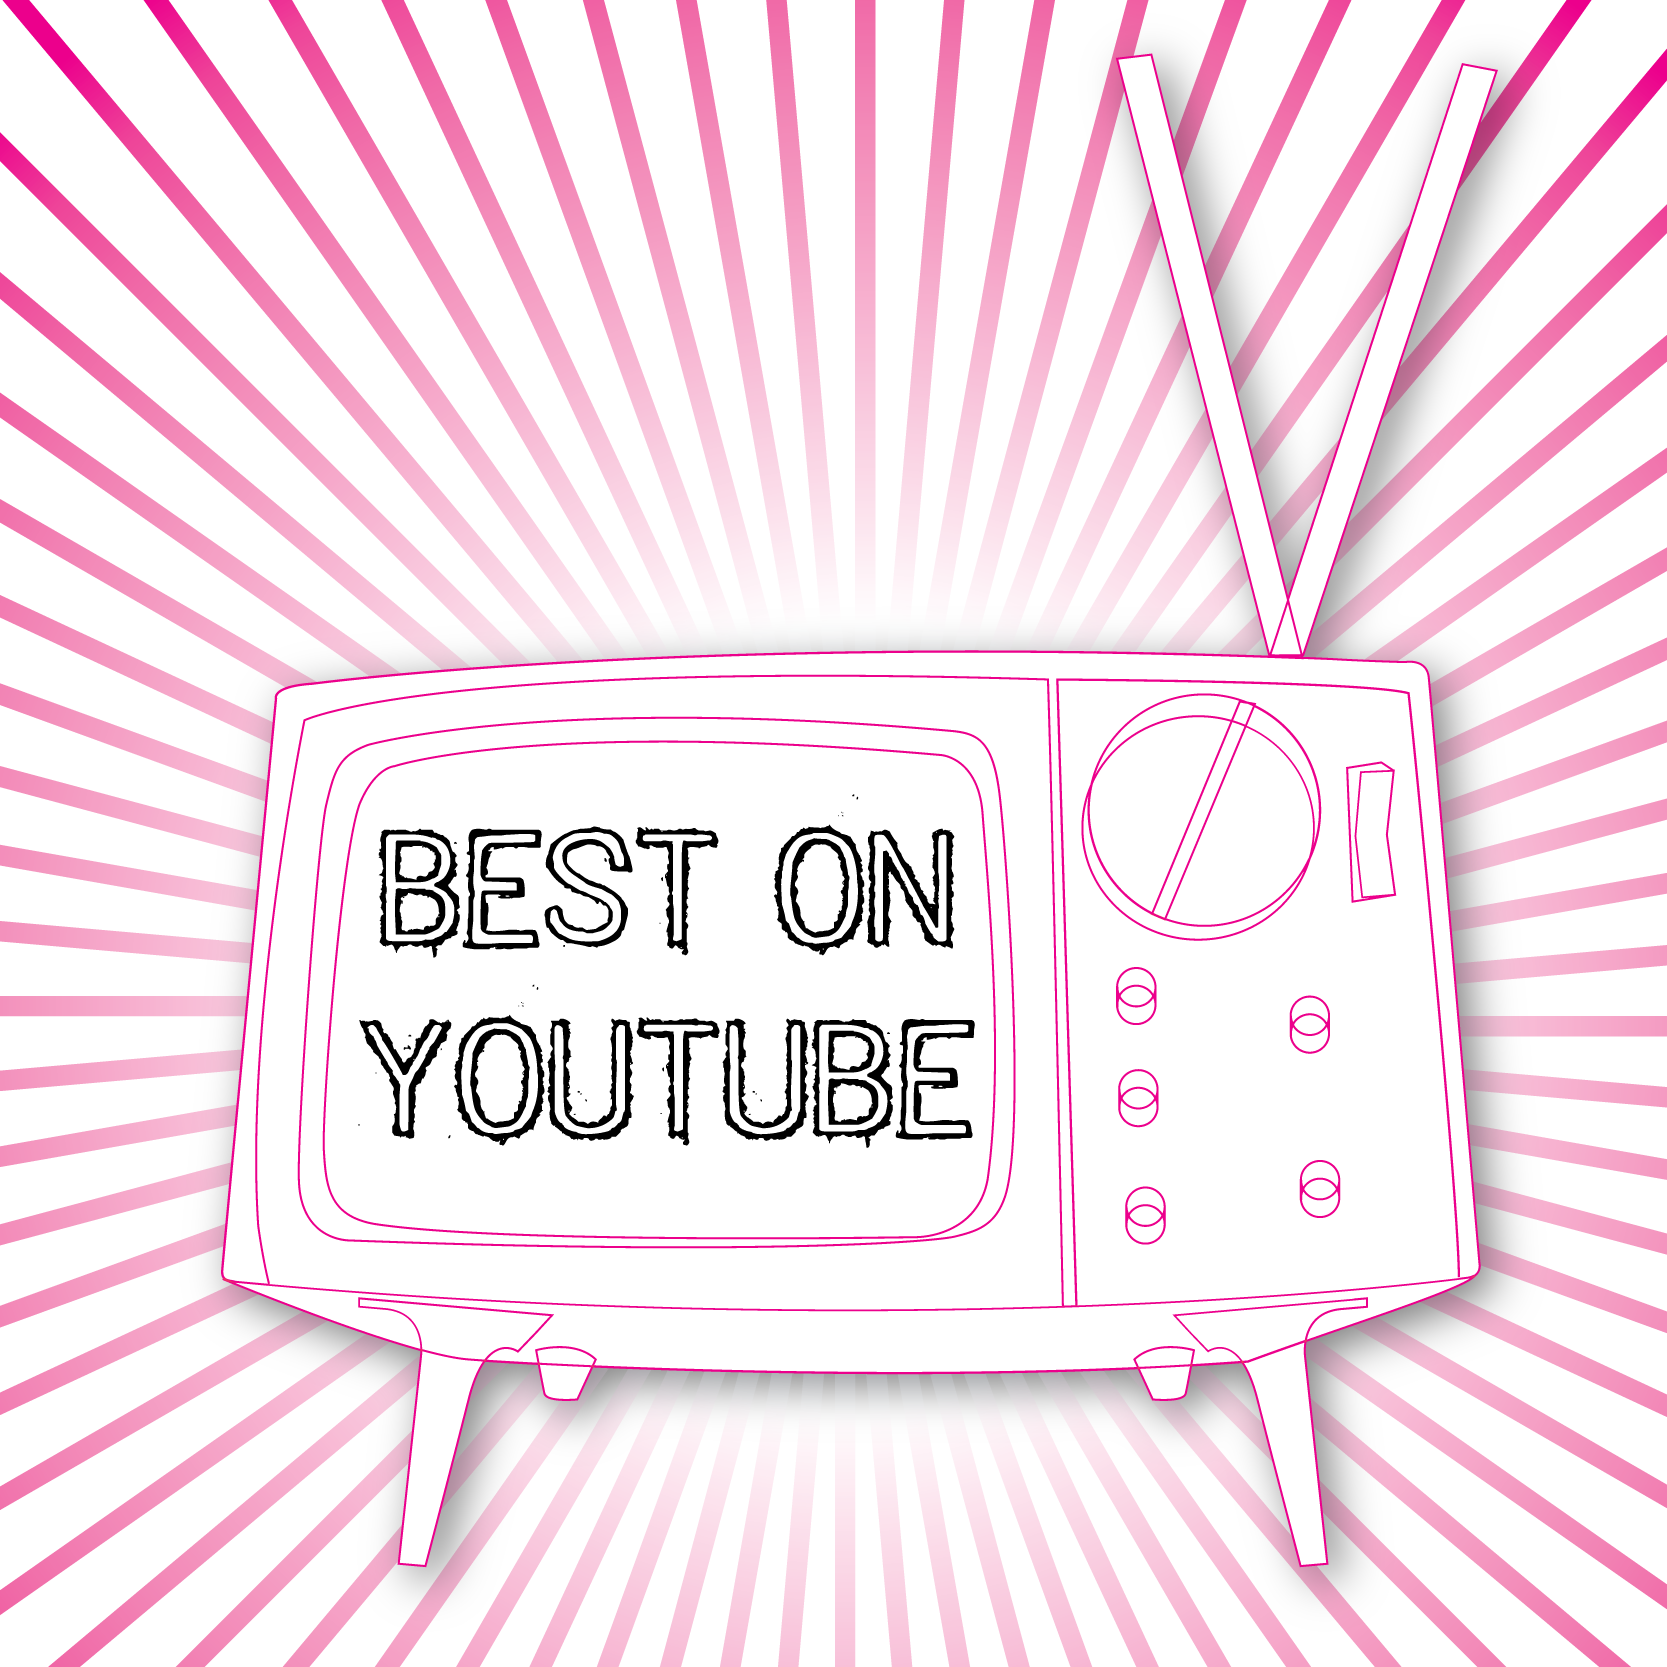 Best on You Tube